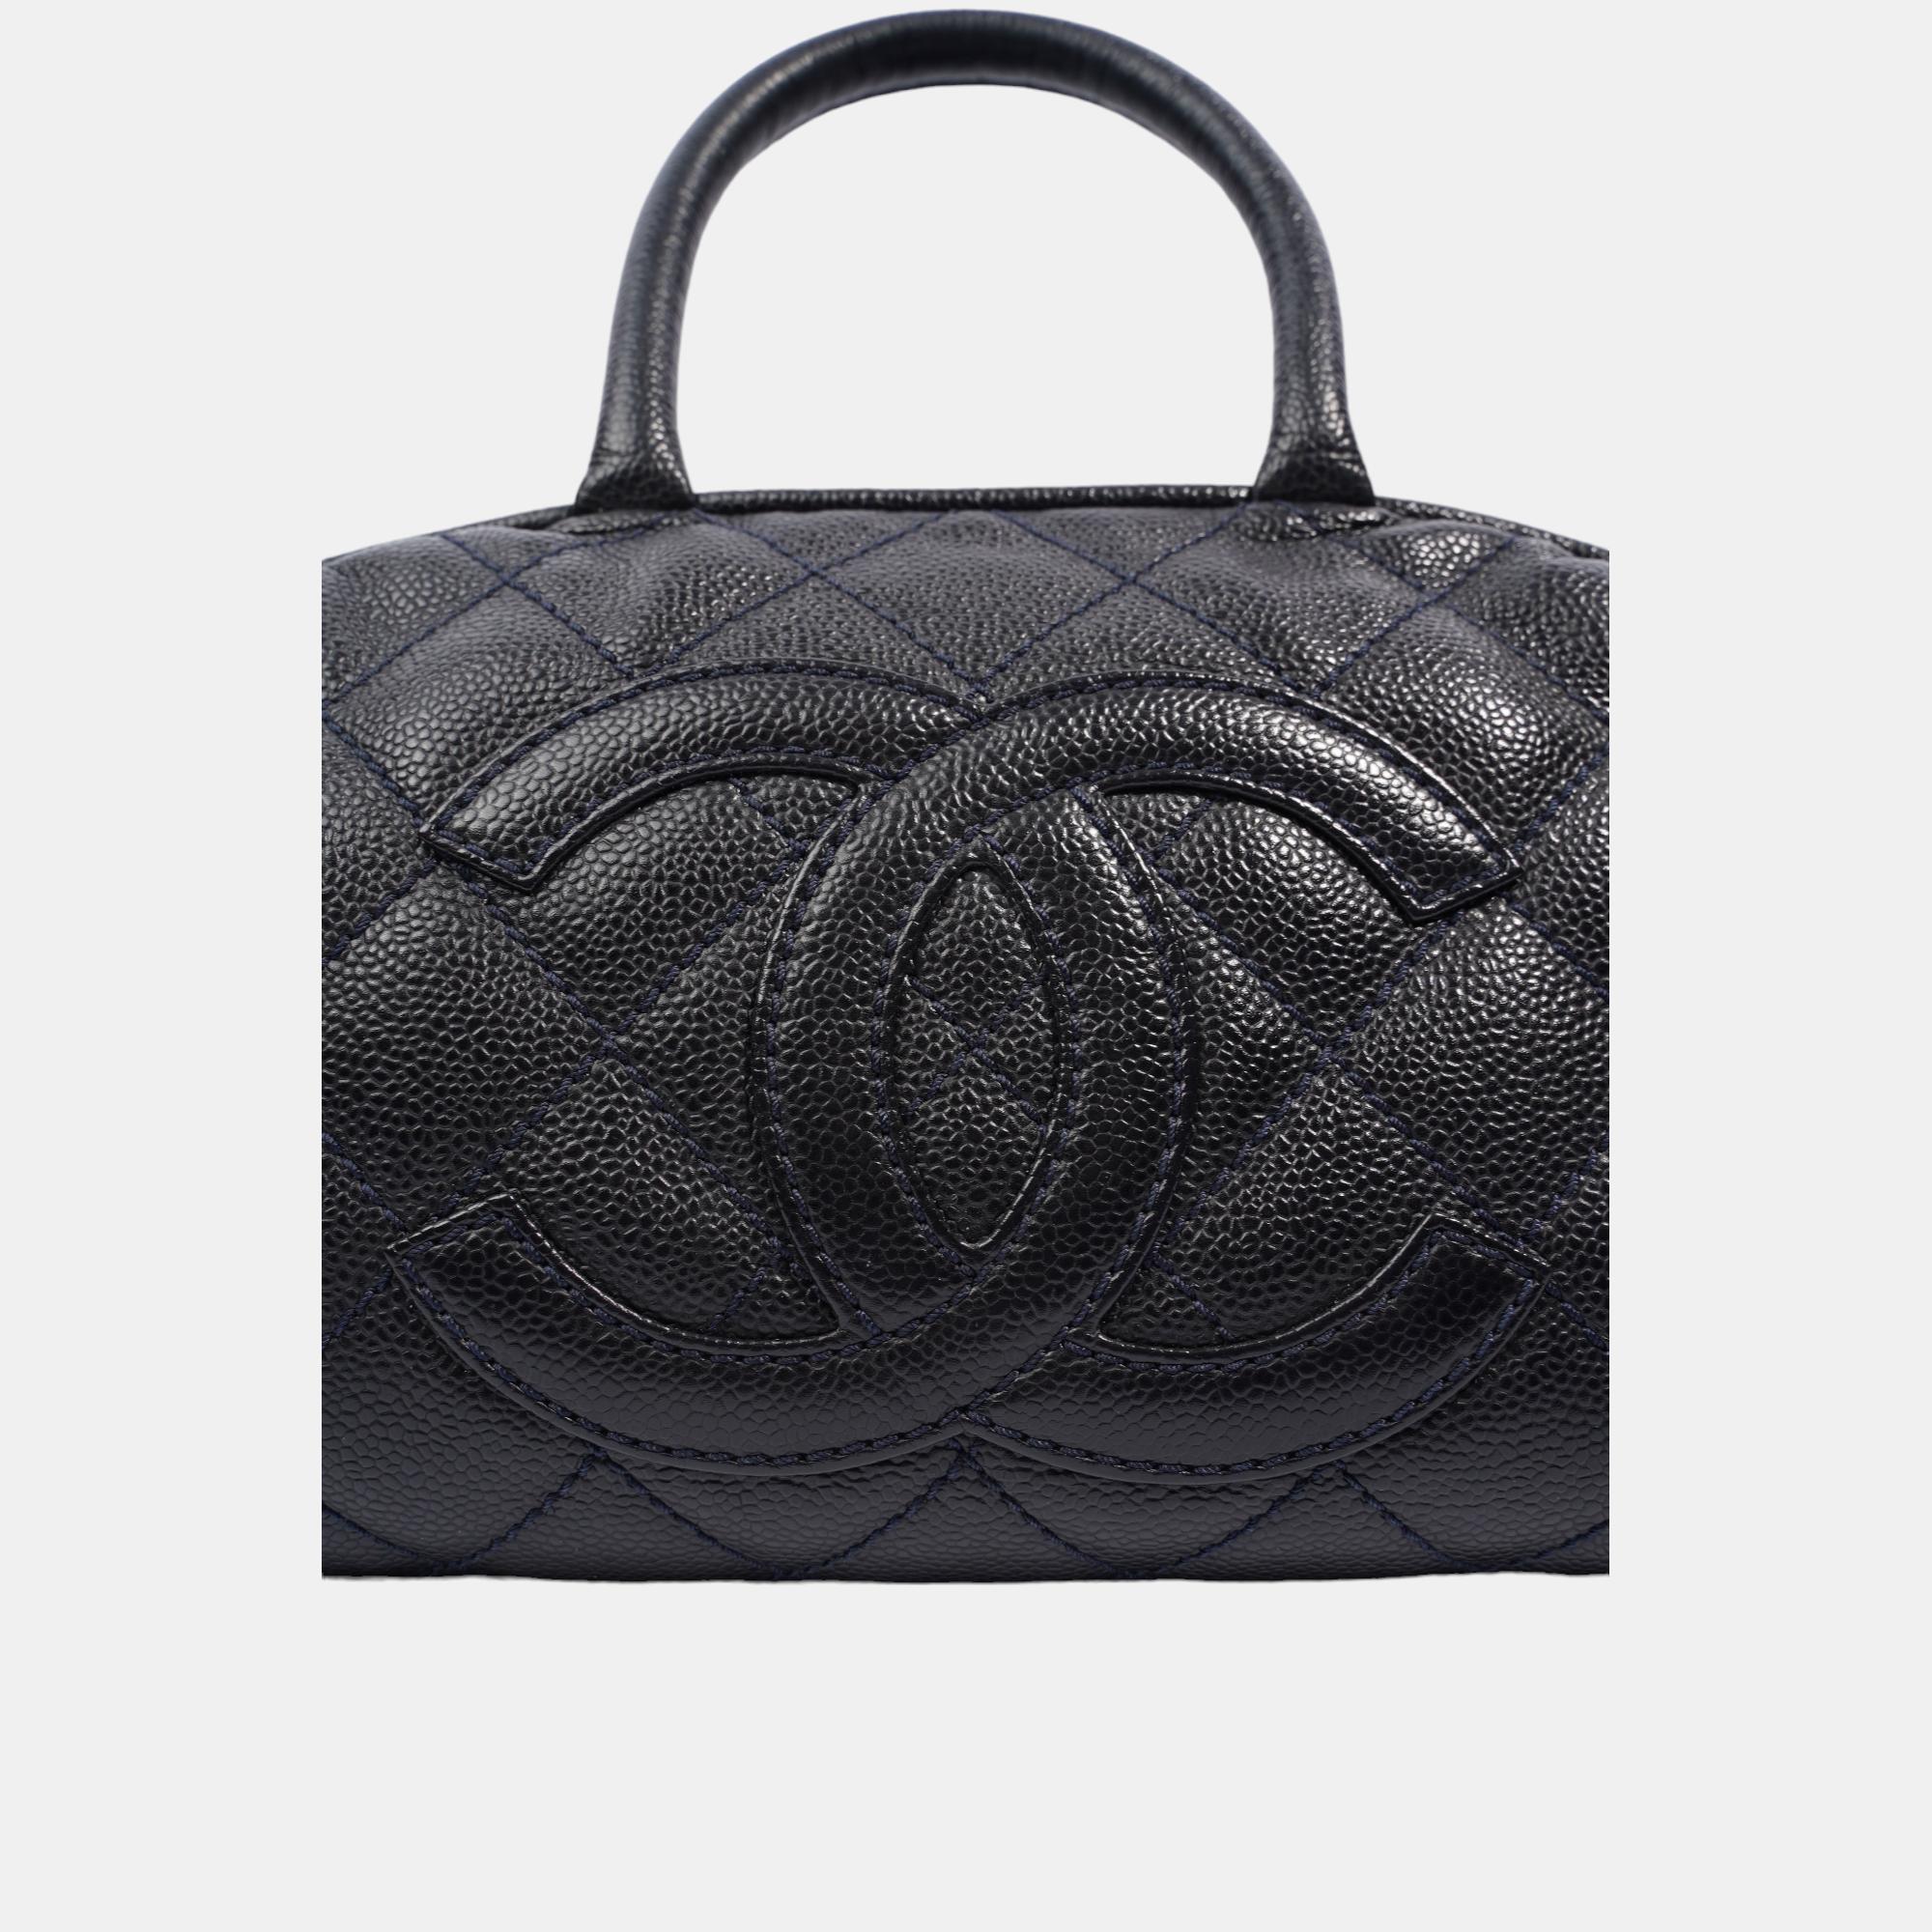 Chanel Quilted Leather Handbag Navy Caviar Leather